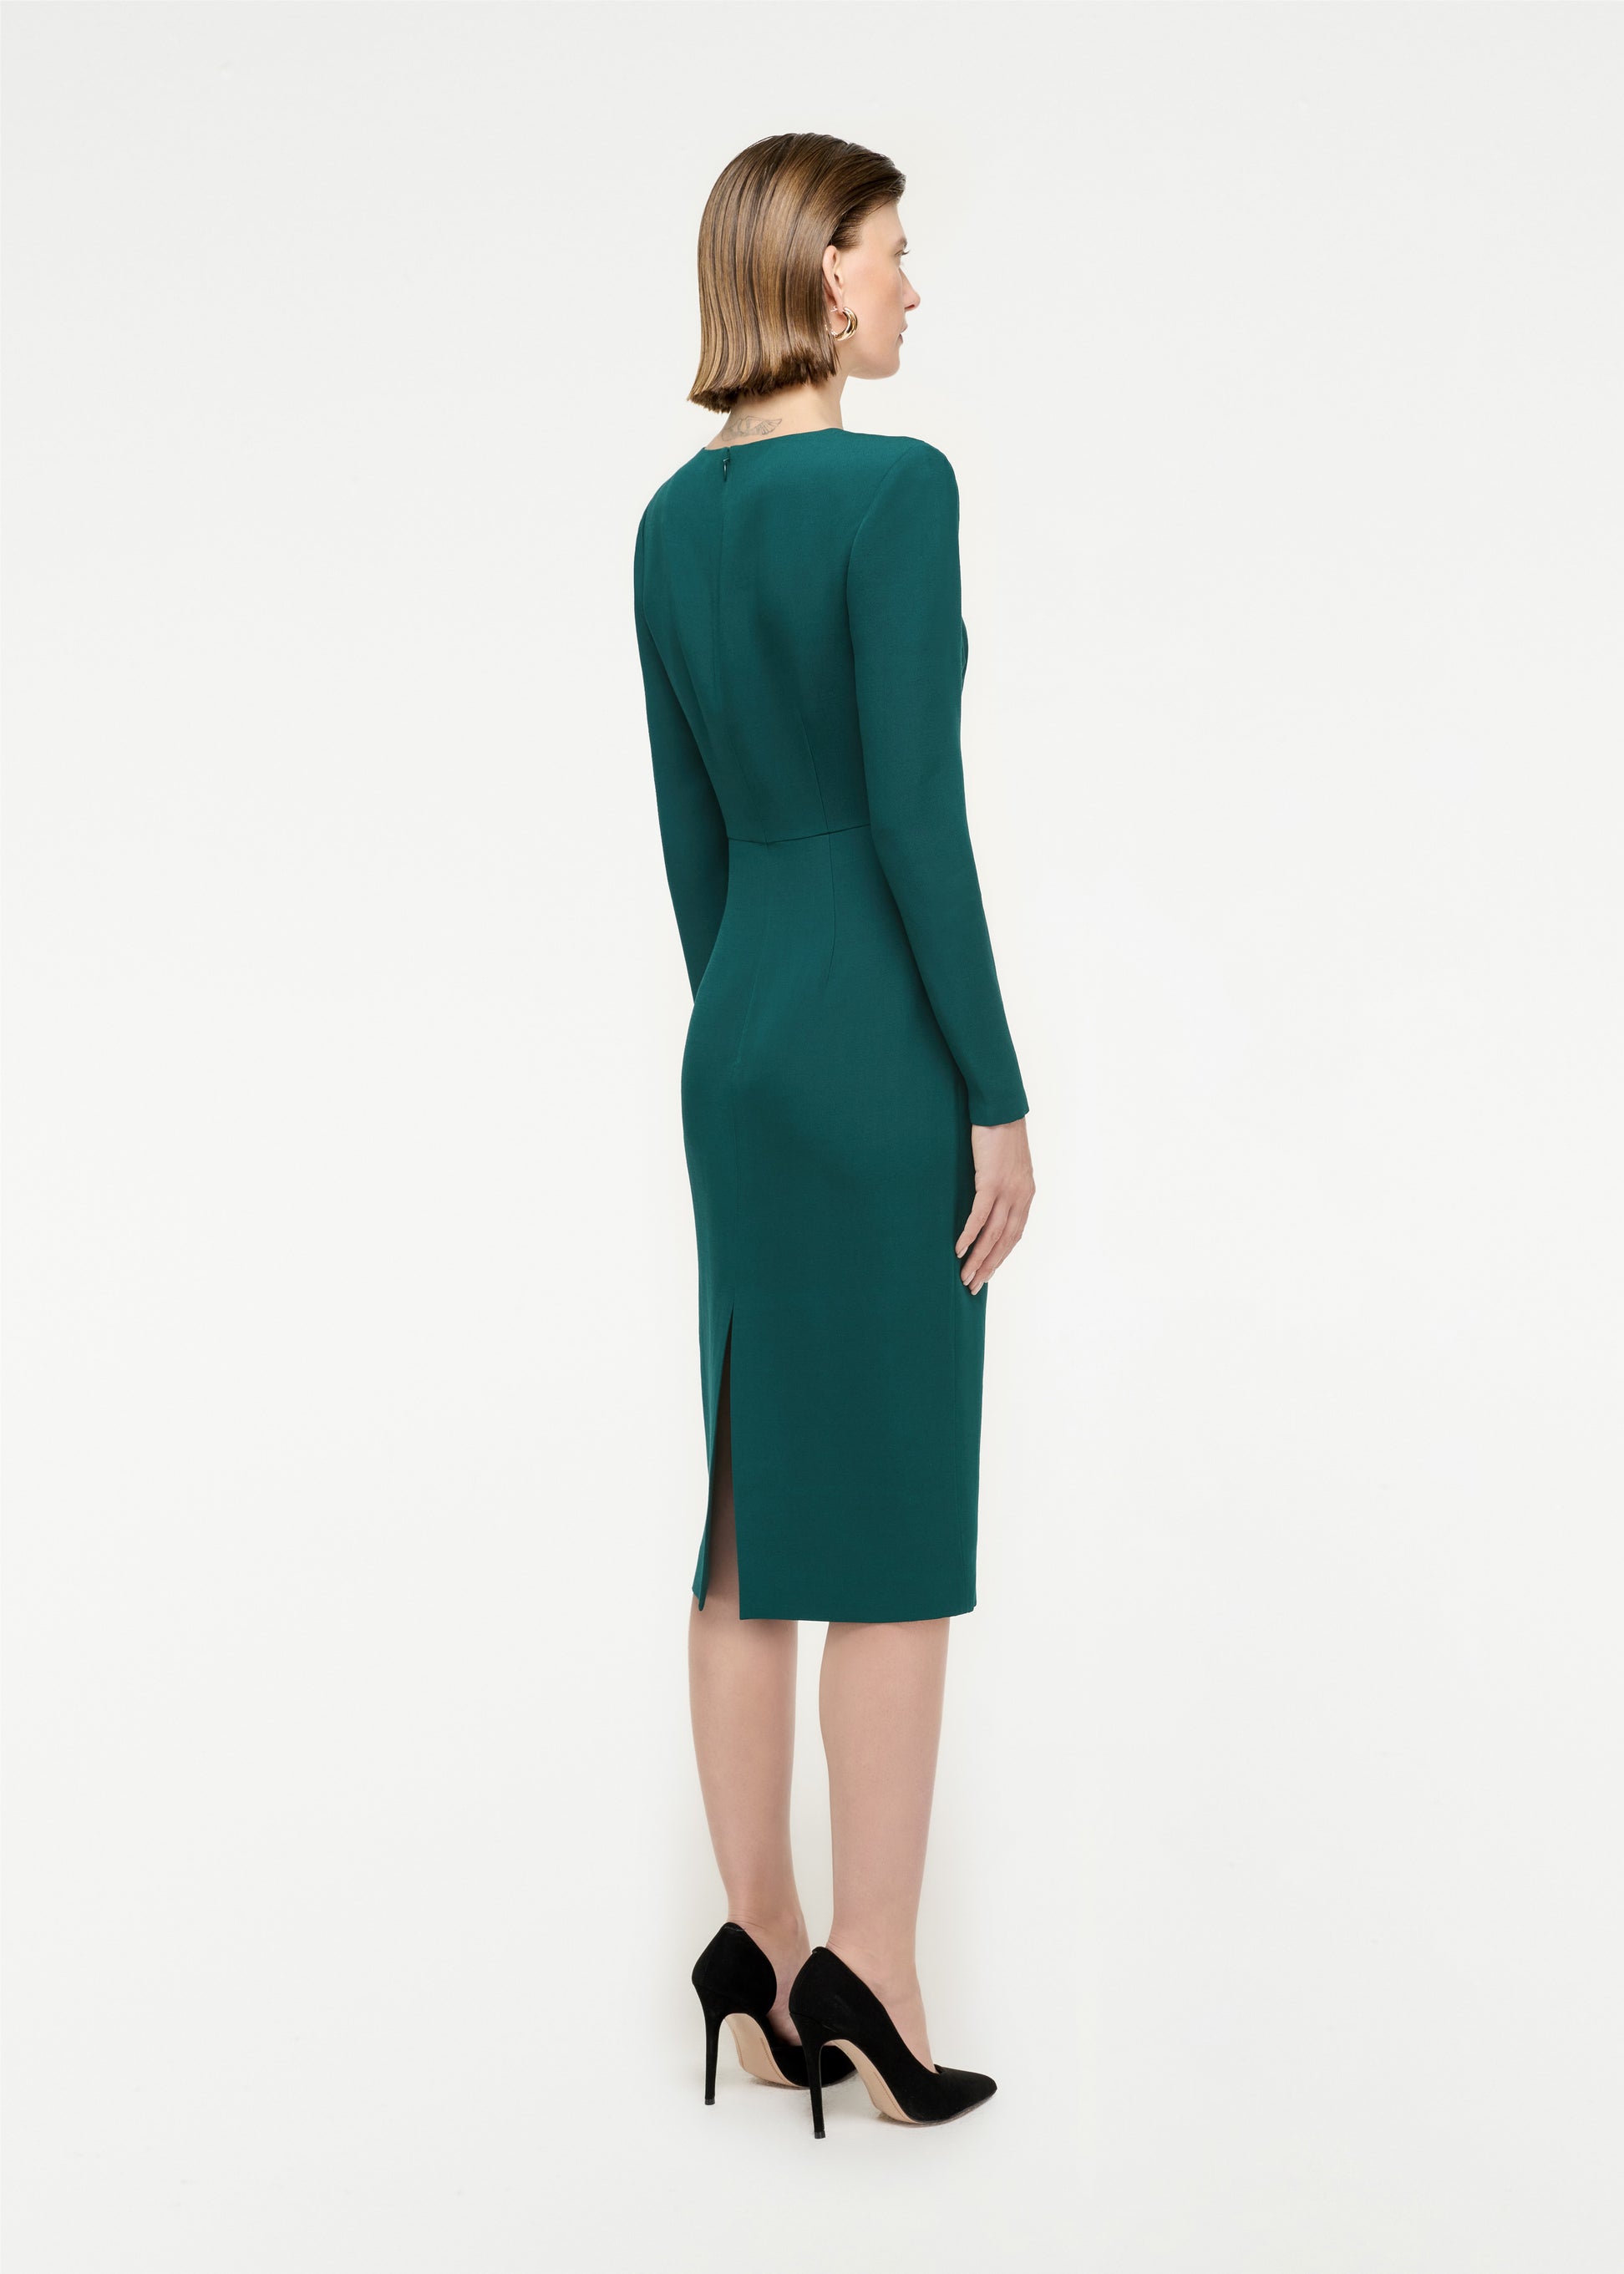 The back of a woman wearing the Long Sleeve Wool Silk Midi Dress in Green